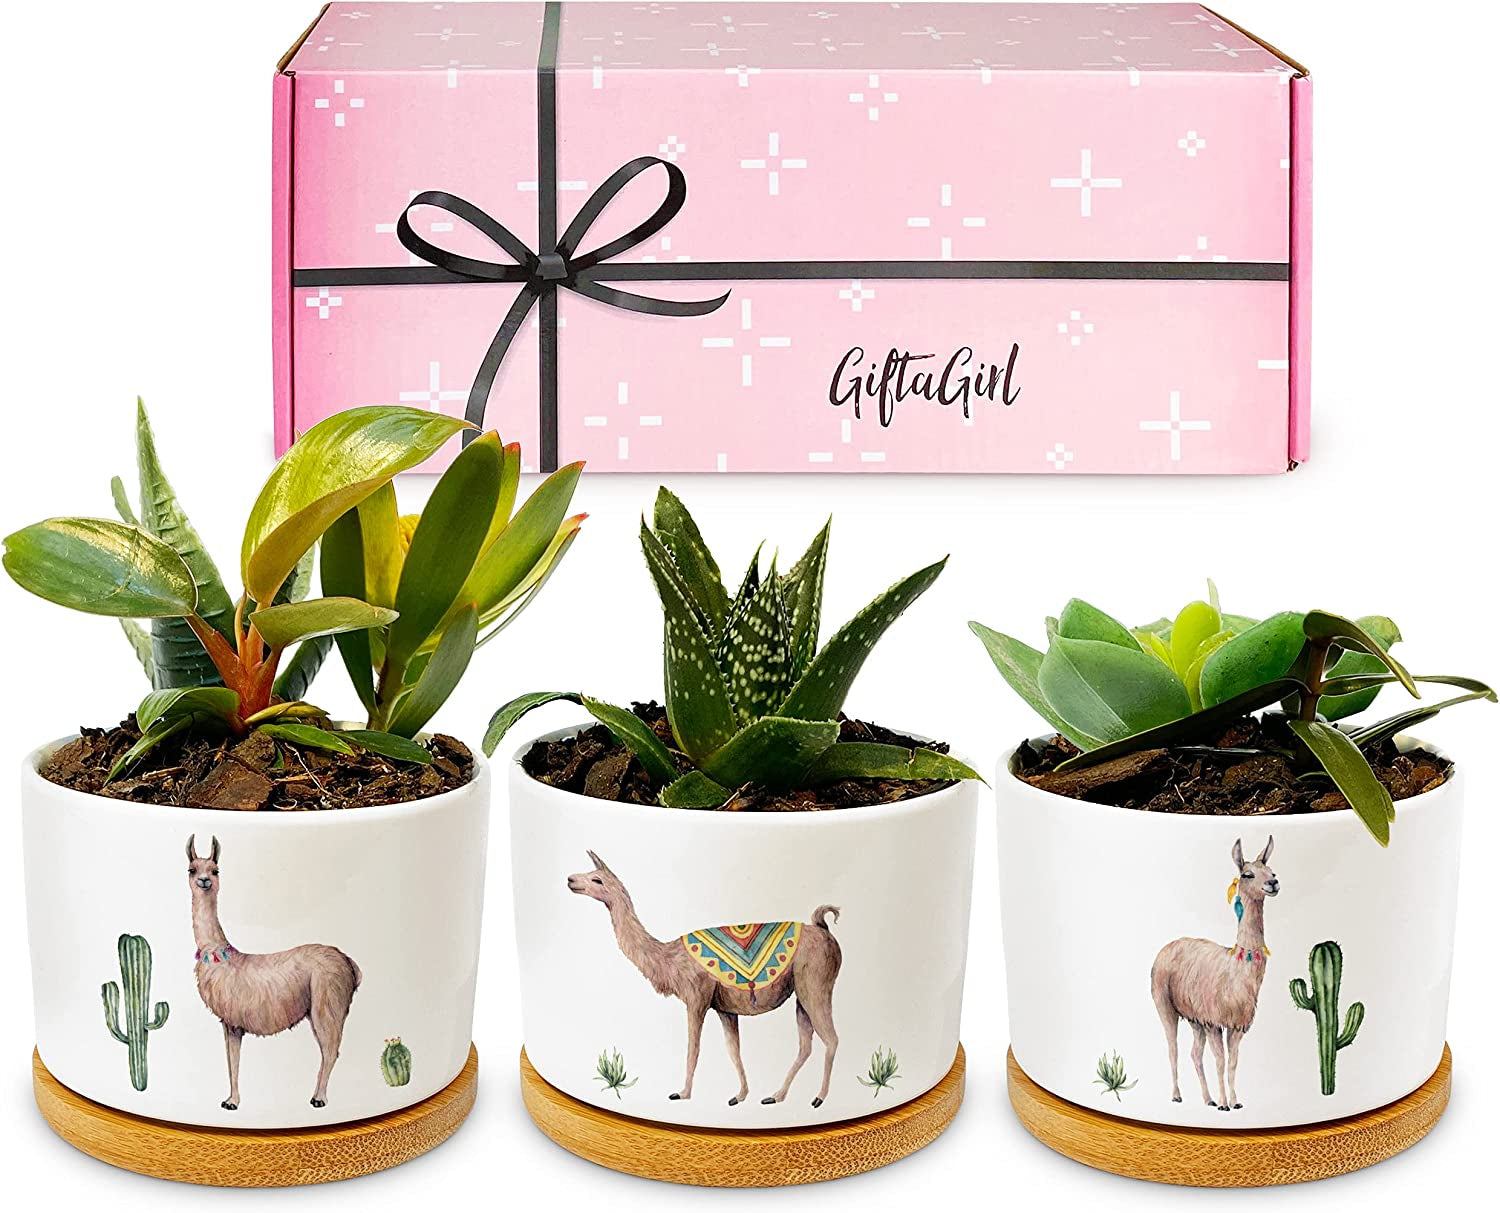 GIFTAGIRL, GIFTAGIRL Llama Gifts for Women - Cute Llama Decor Llama Stuff Our Llama Planter Sets Are Ideal Gifts for Girls Bedroom Kitchen or Bathroom and Great for Any Occasion, Arrive Beautifully Gift Boxed